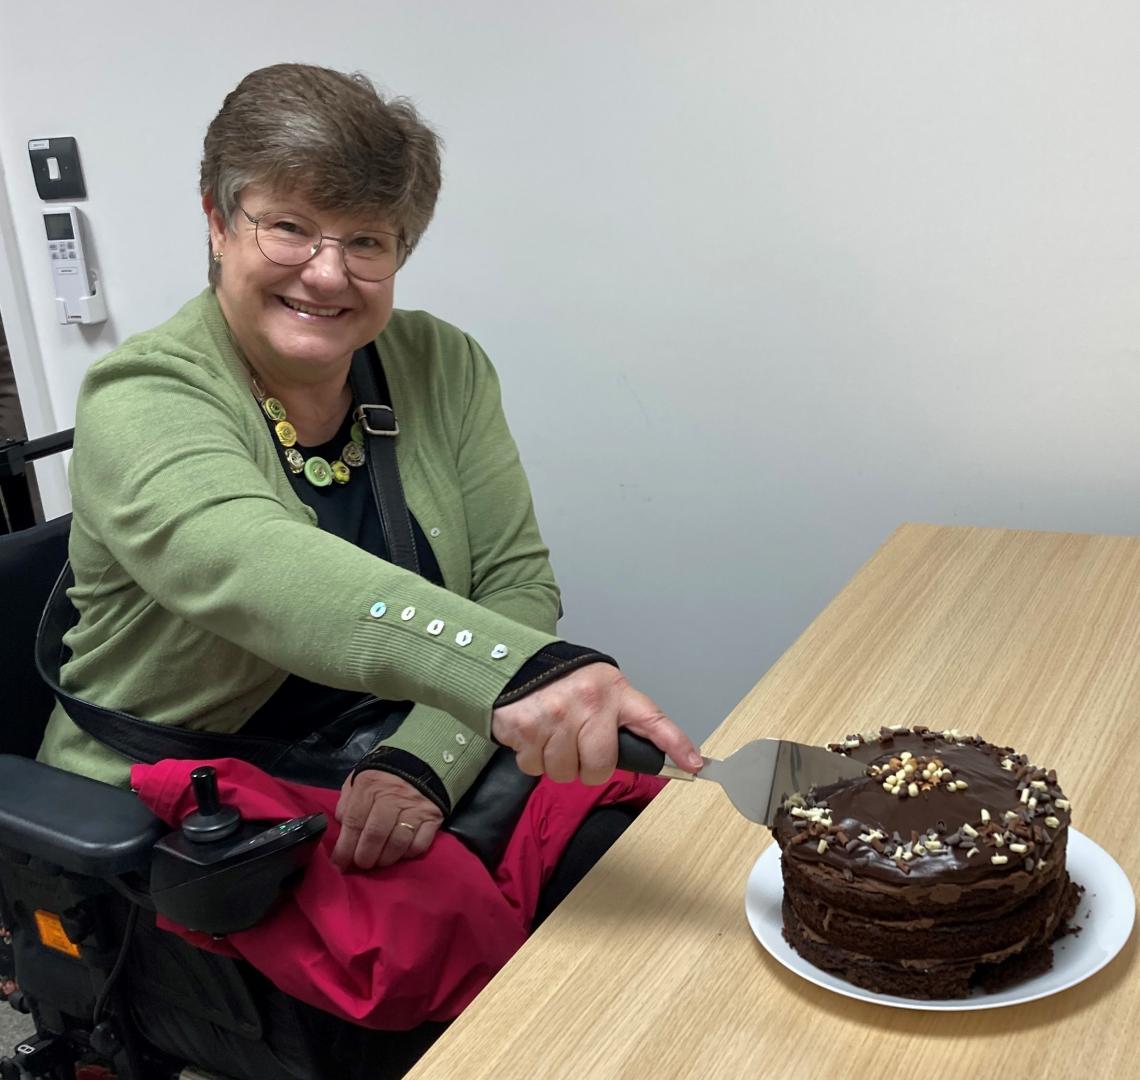 A photo of a lady in a wheelchair smiling at the camera while cutting into a large chocolate cake.